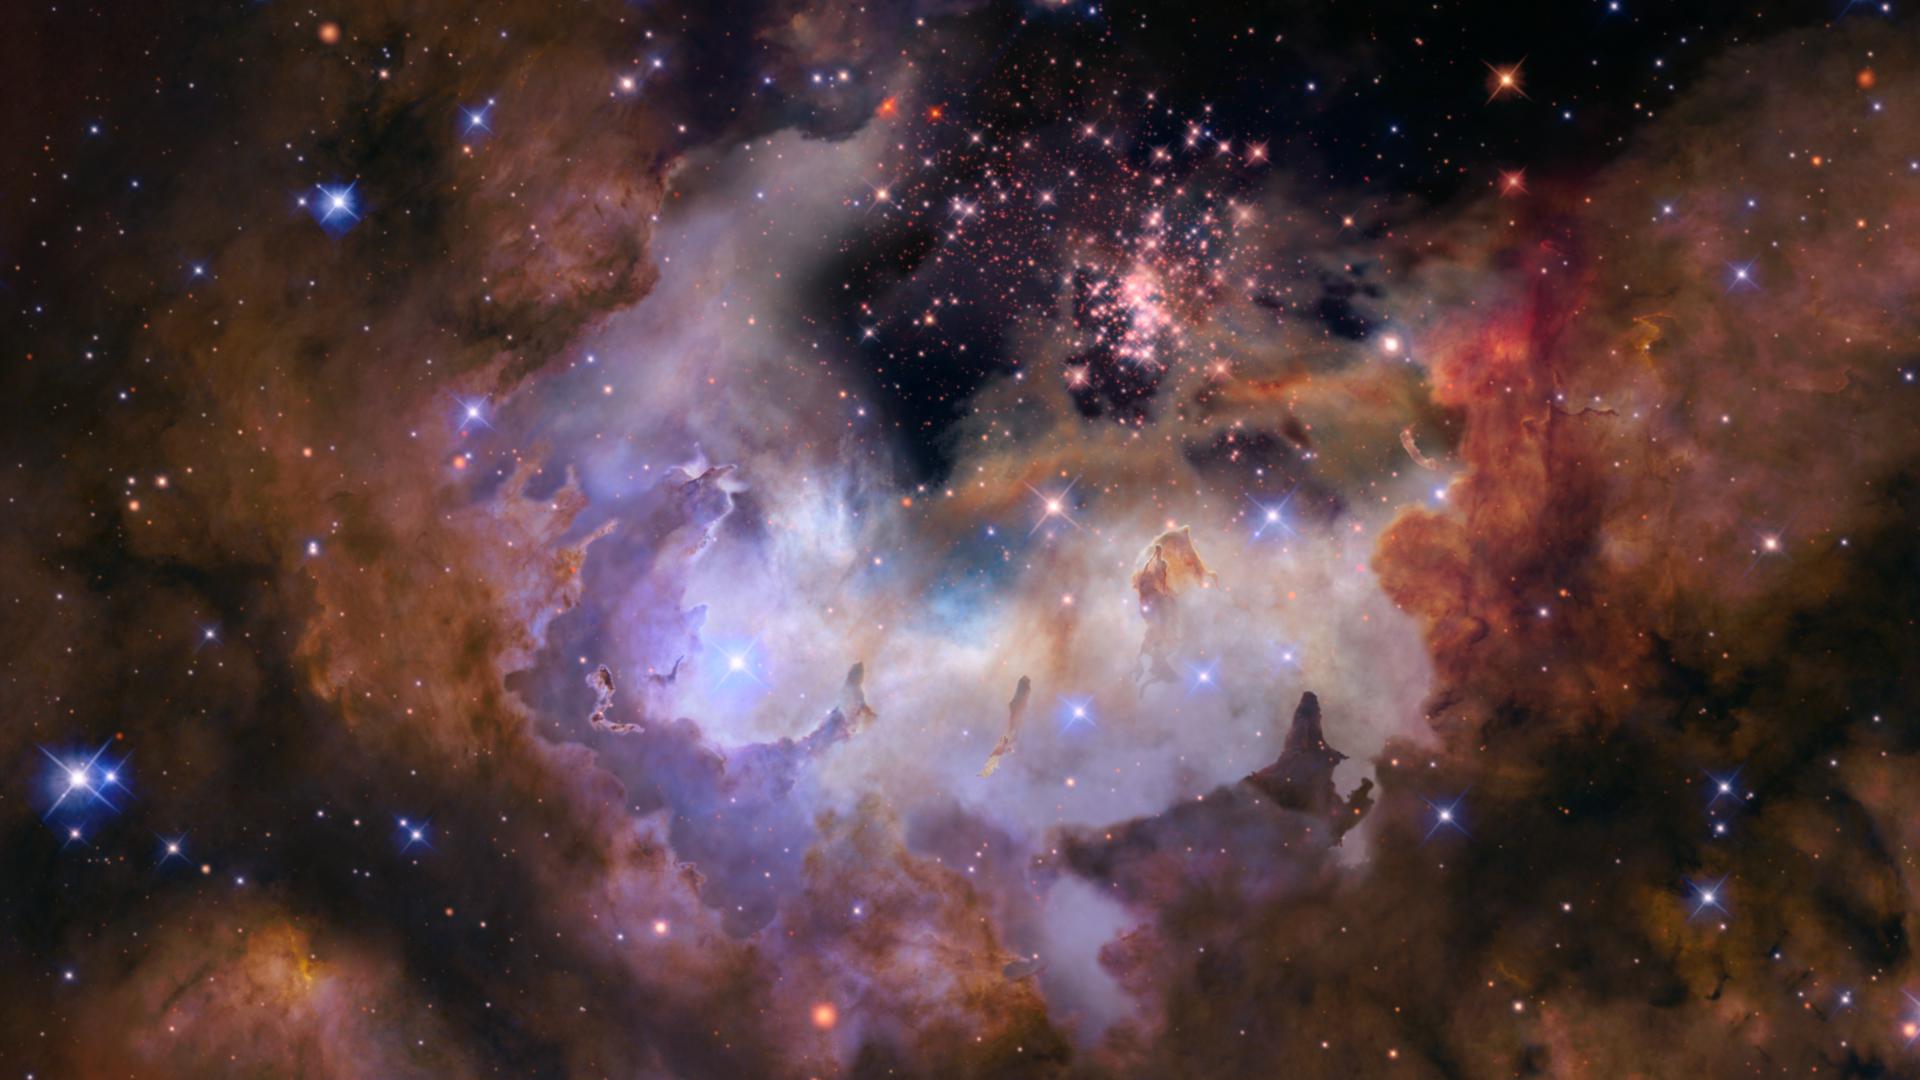 A visualization flying into the nebula Gum 29 and the star cluster Westerlund 2 at its core